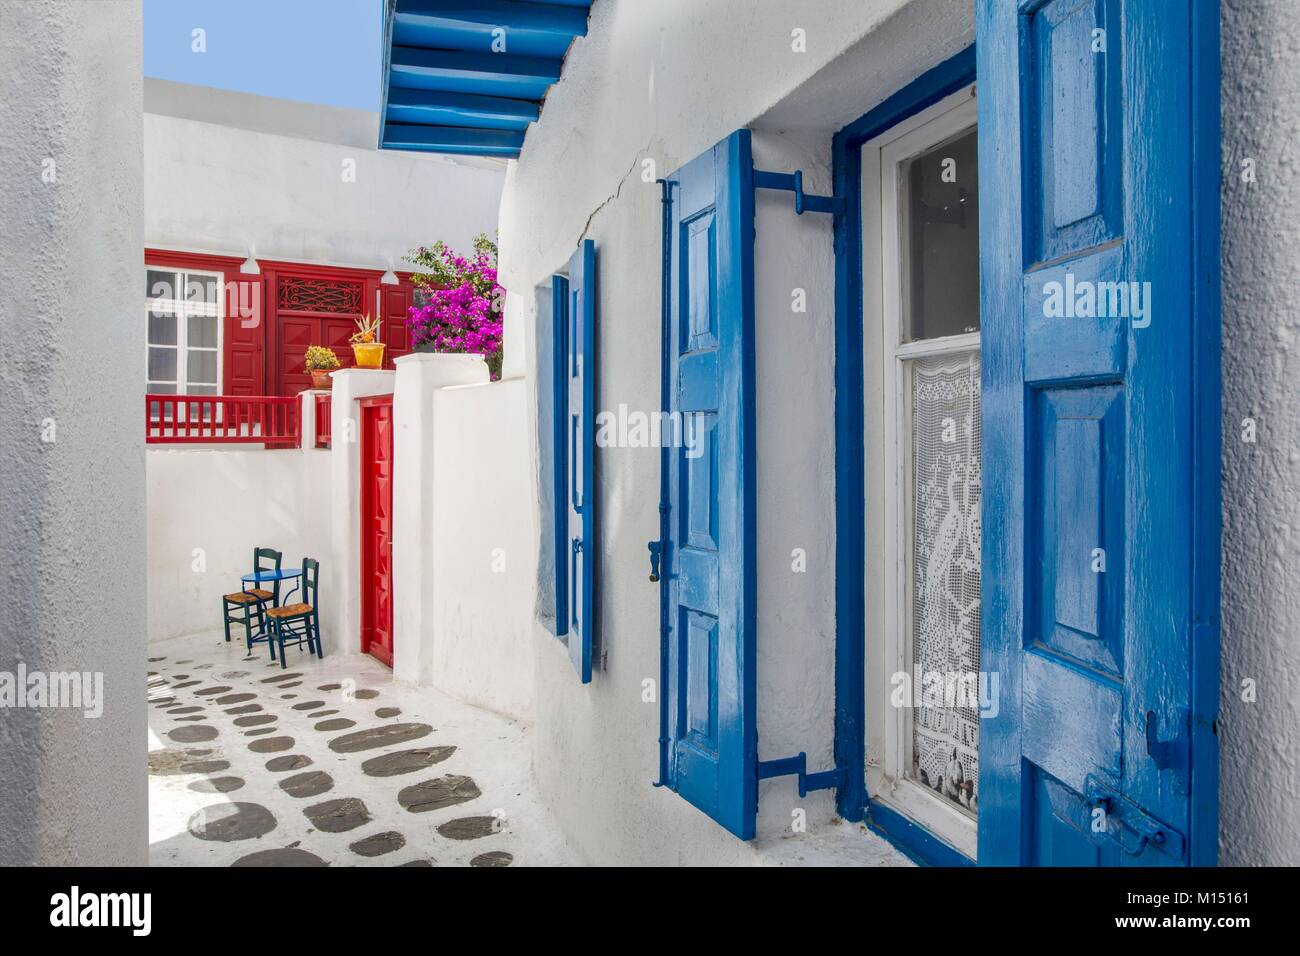 Greece, Cyclades islands, Mykonos island, narrow street with painted floor and colored staircases Stock Photo